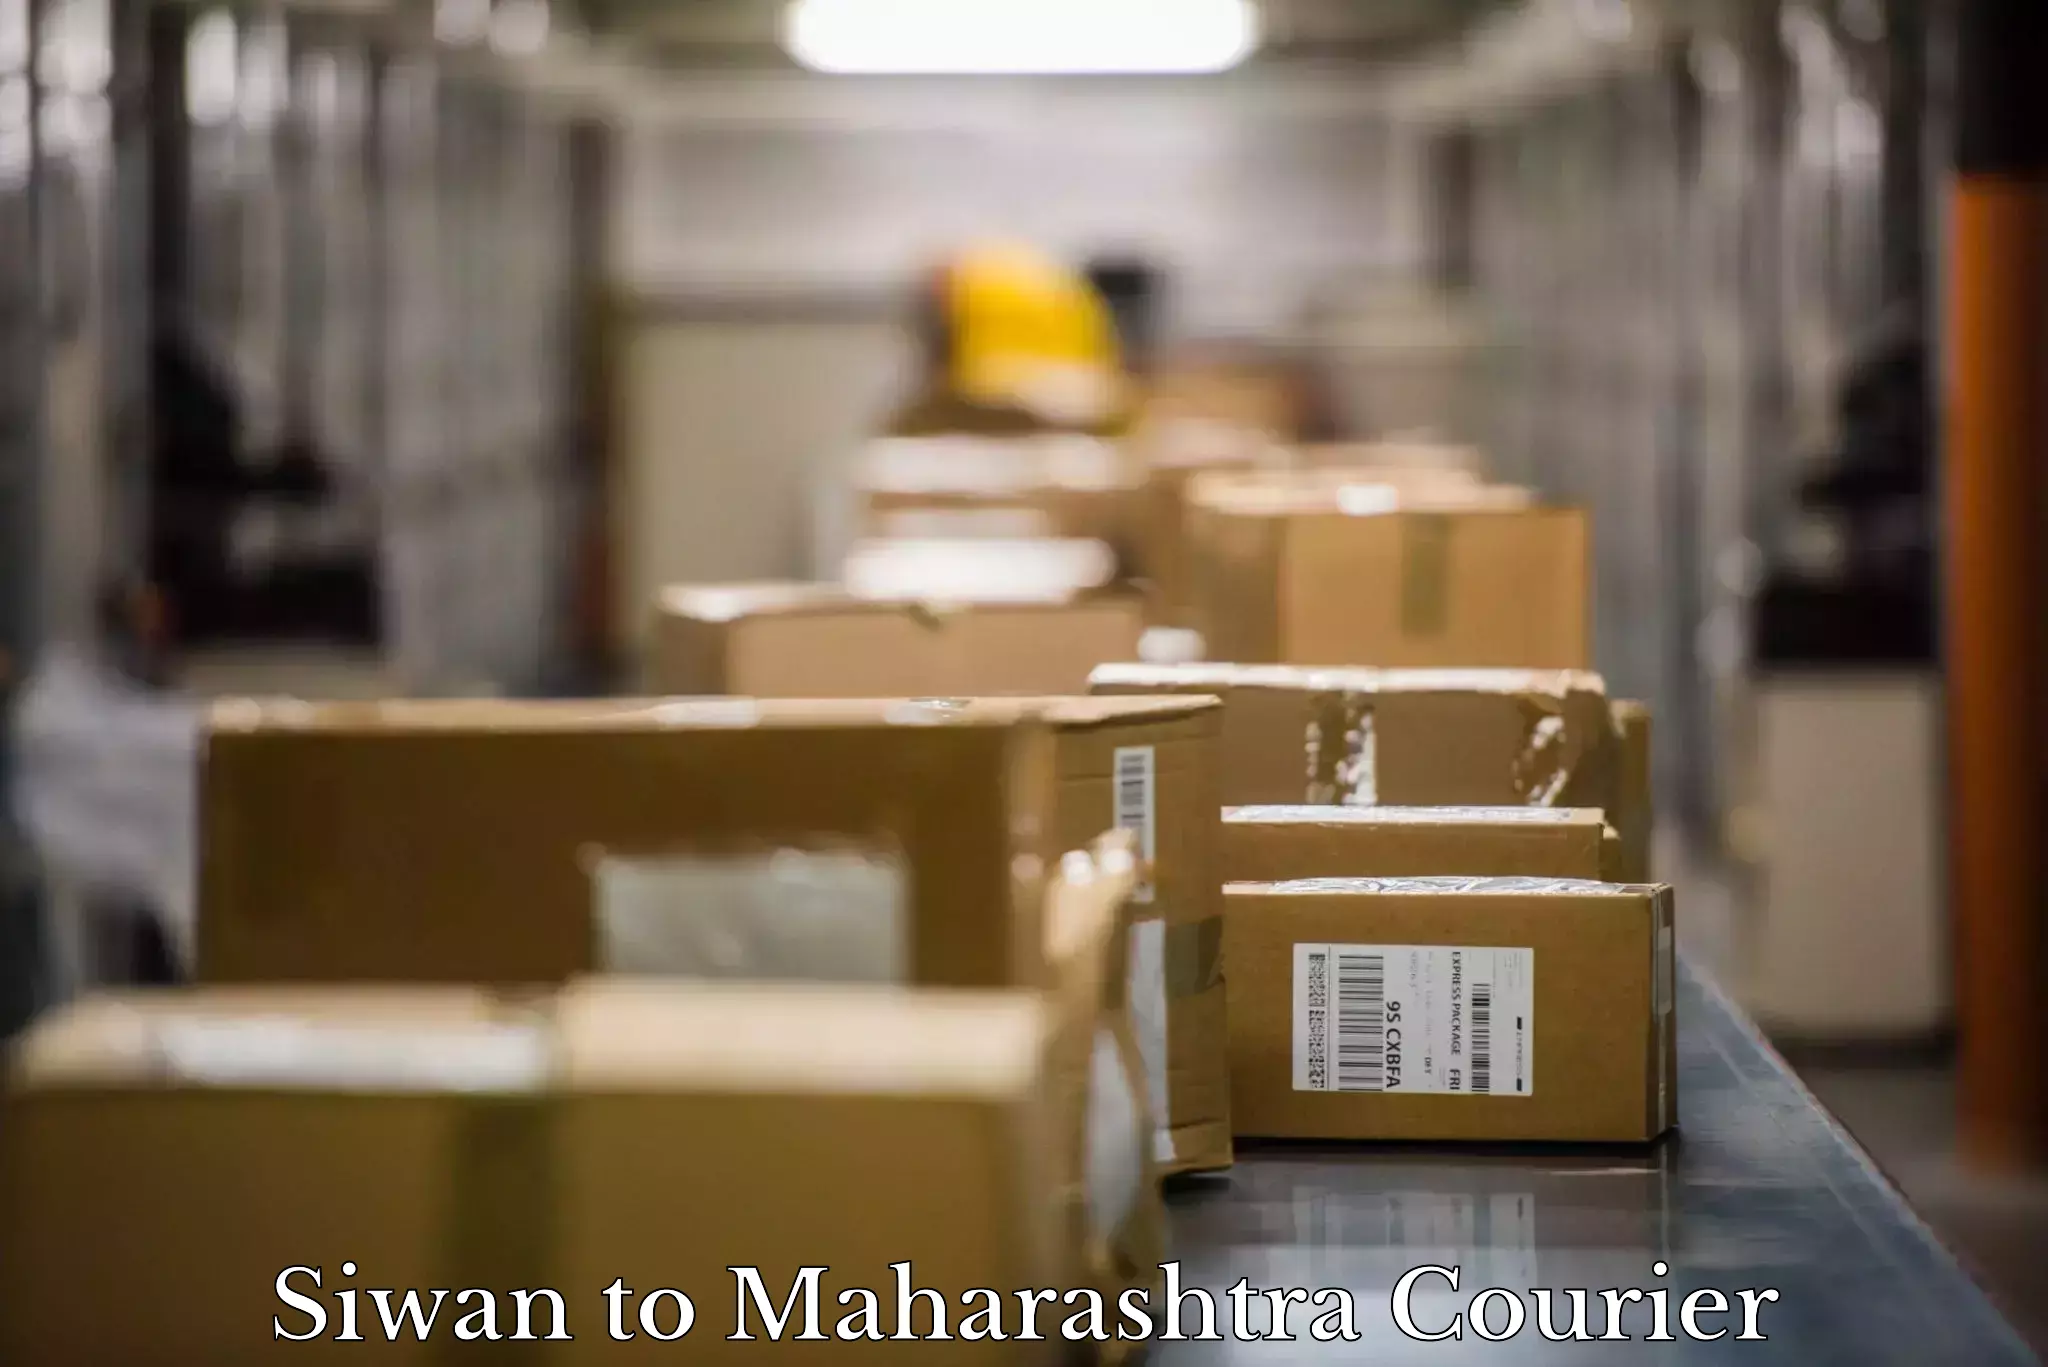 Furniture moving specialists Siwan to Maharashtra